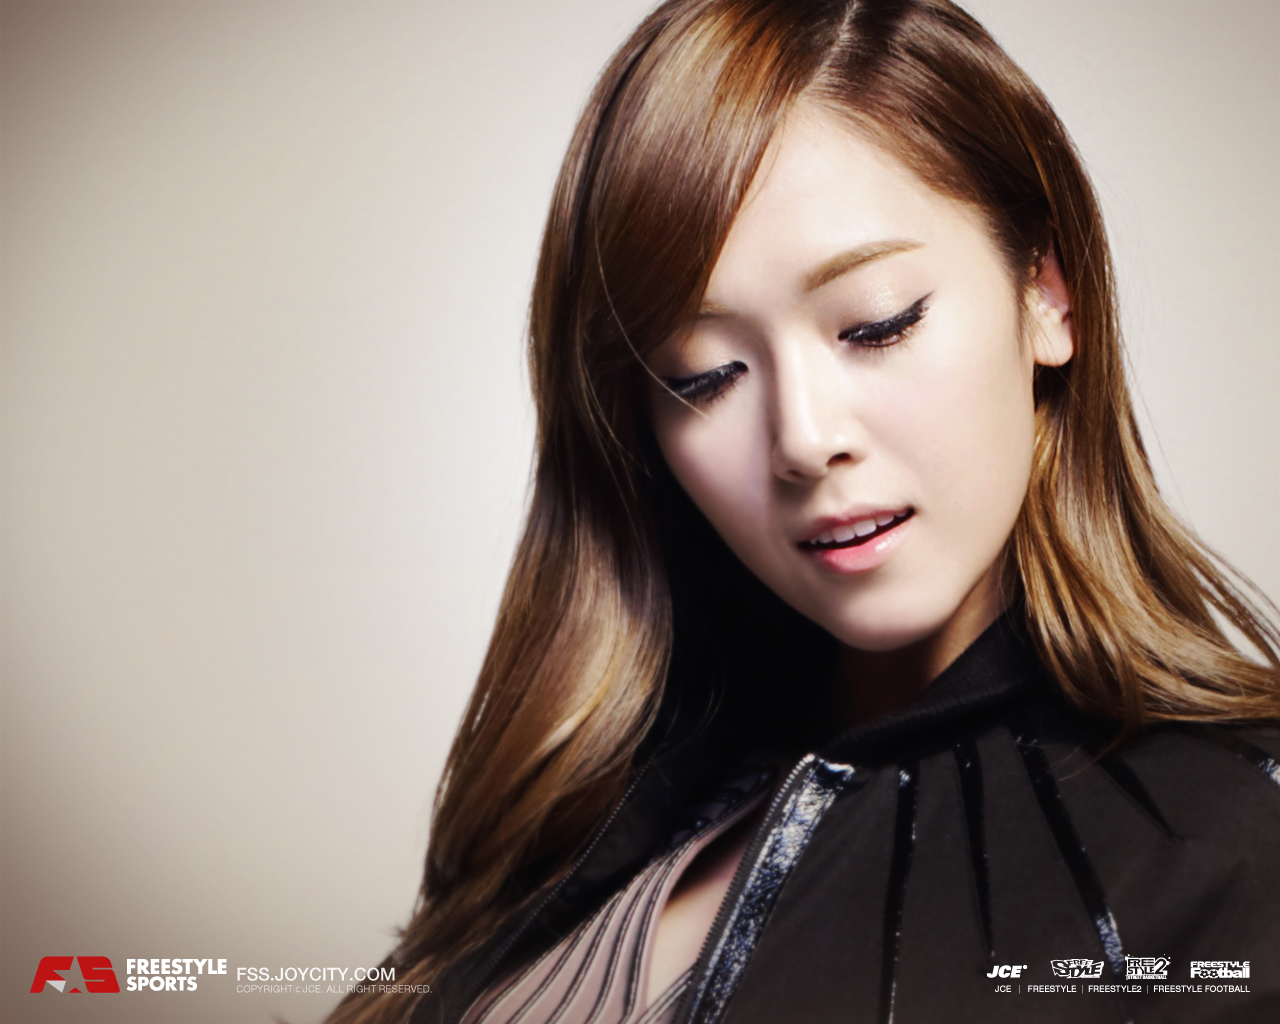 Wallpaper Flawlessica Snsd S Jessica Jung Fansite